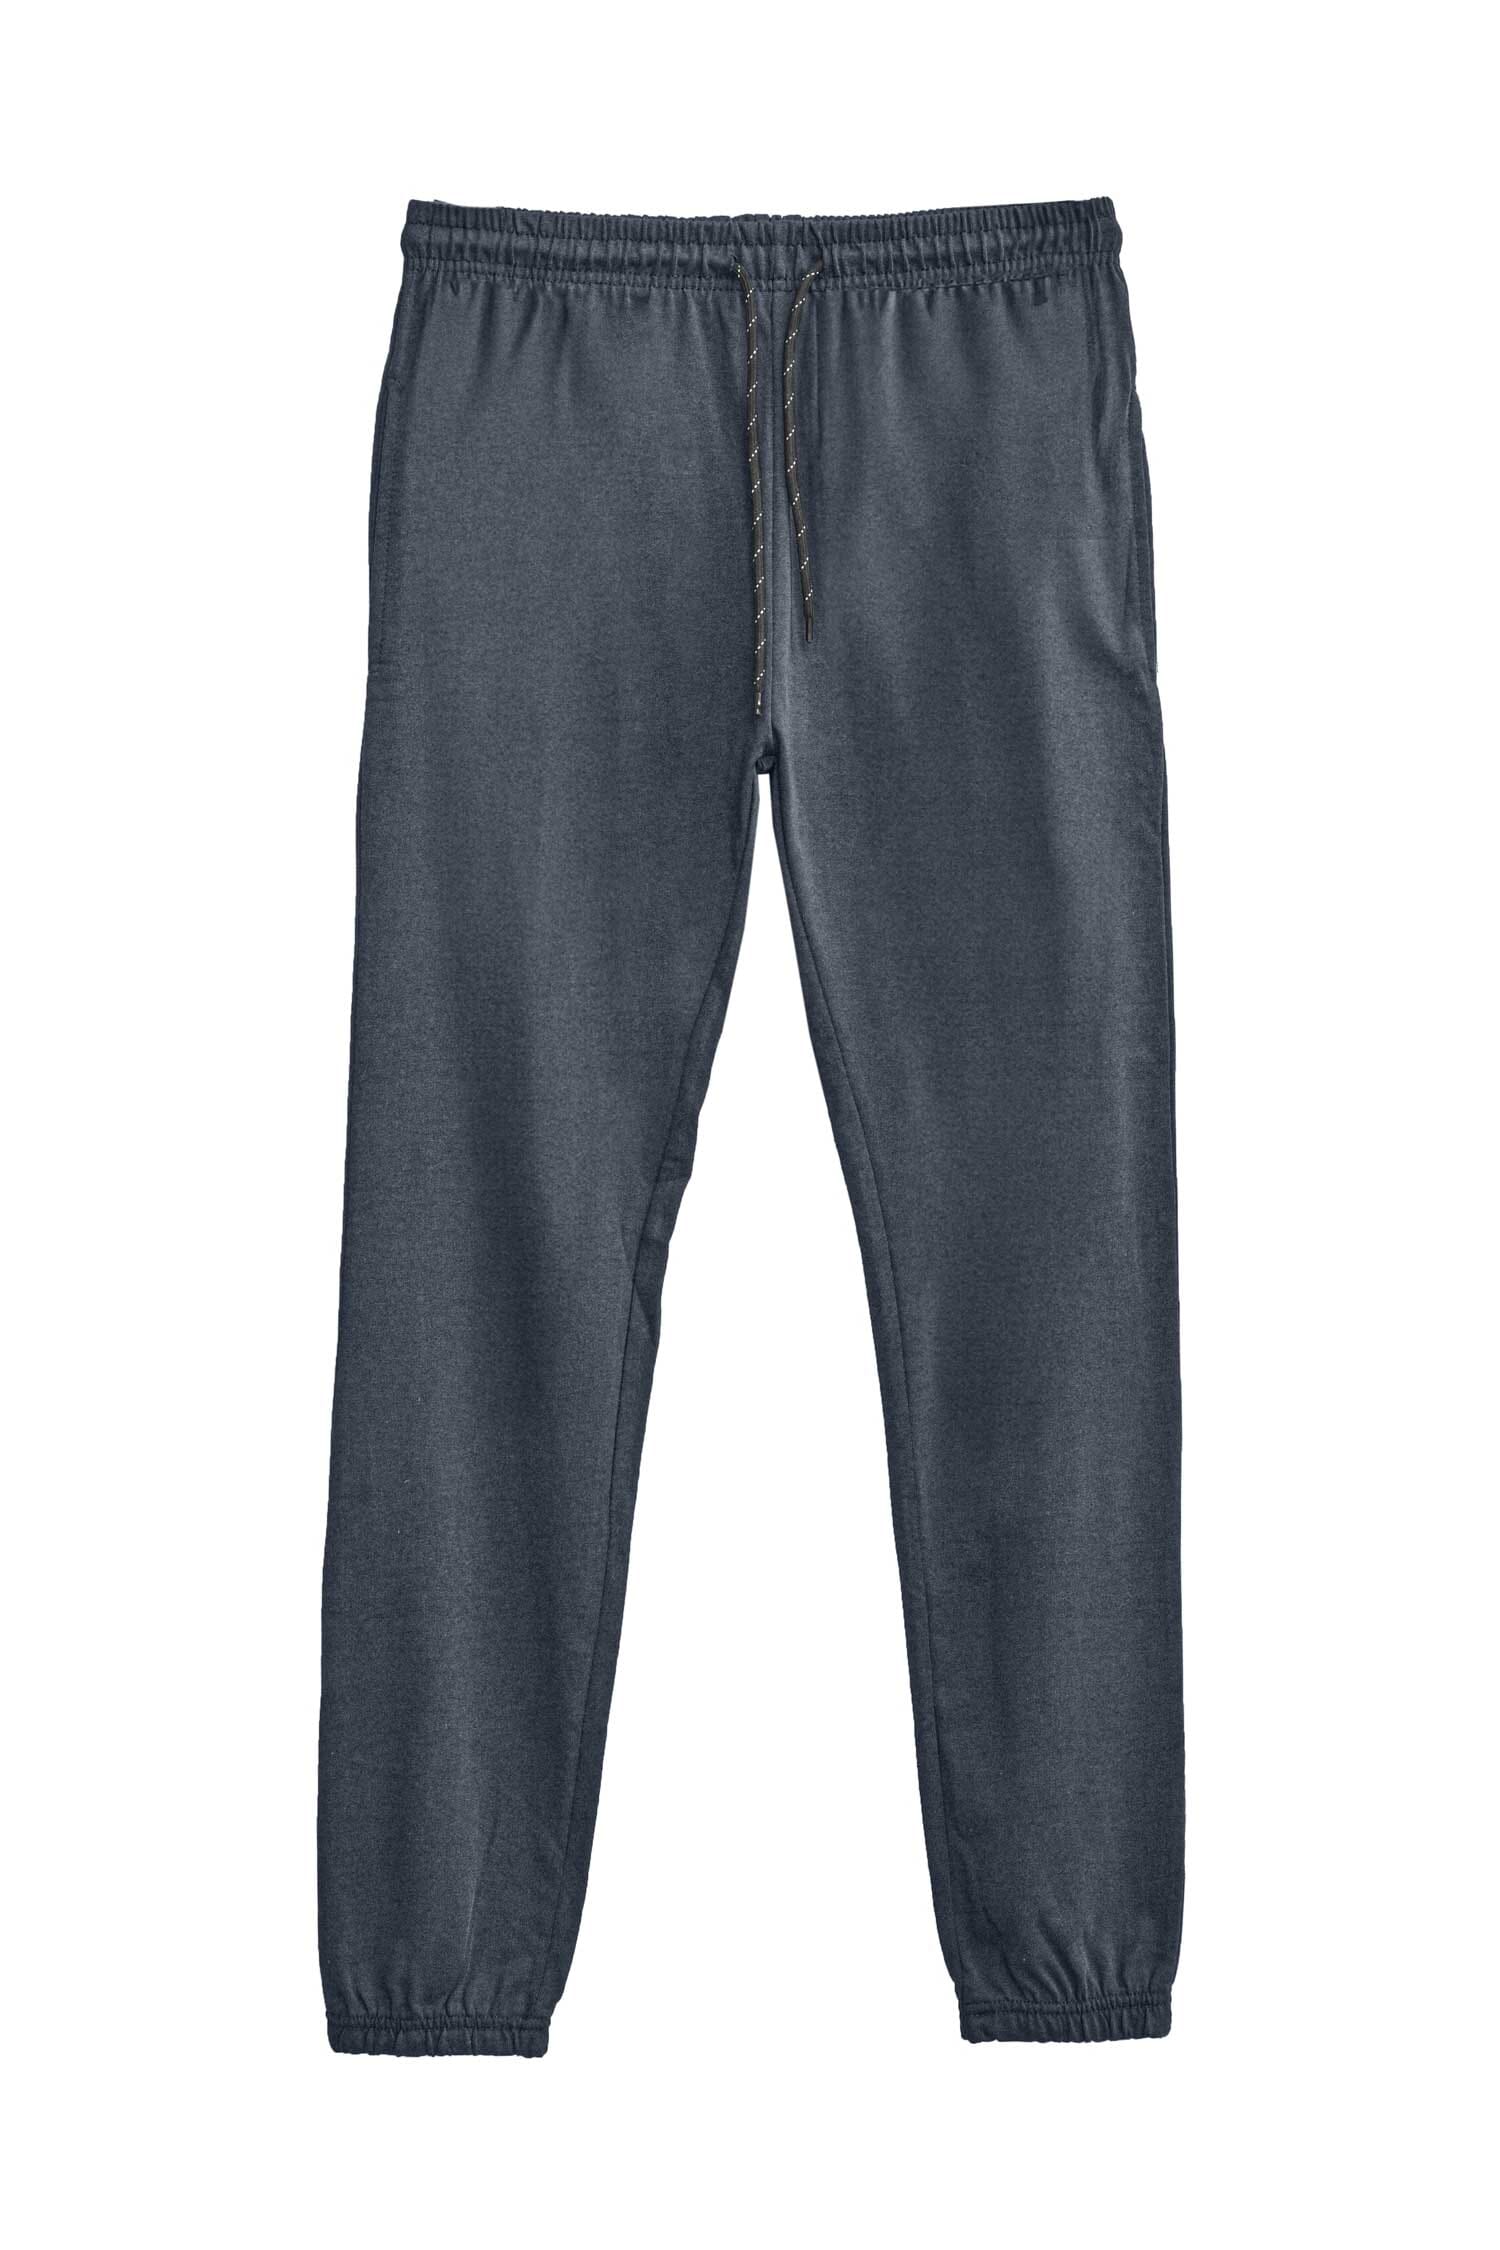 Cicay Men's Roskilde Solid Trousers